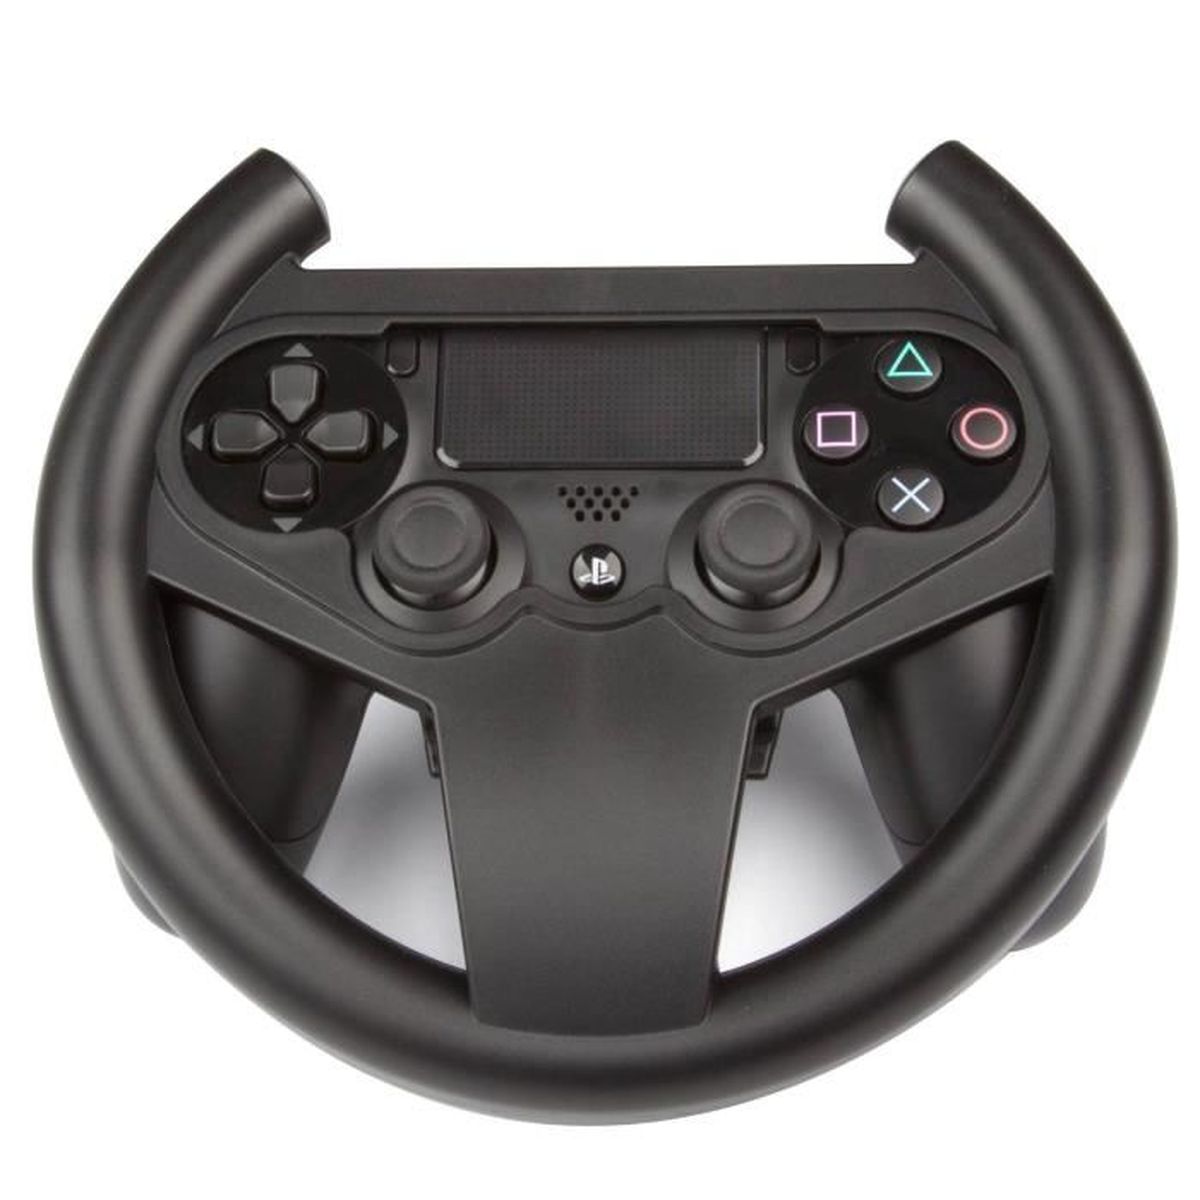 Nfs джойстик. Volant. Gaming Wheel for playing games.